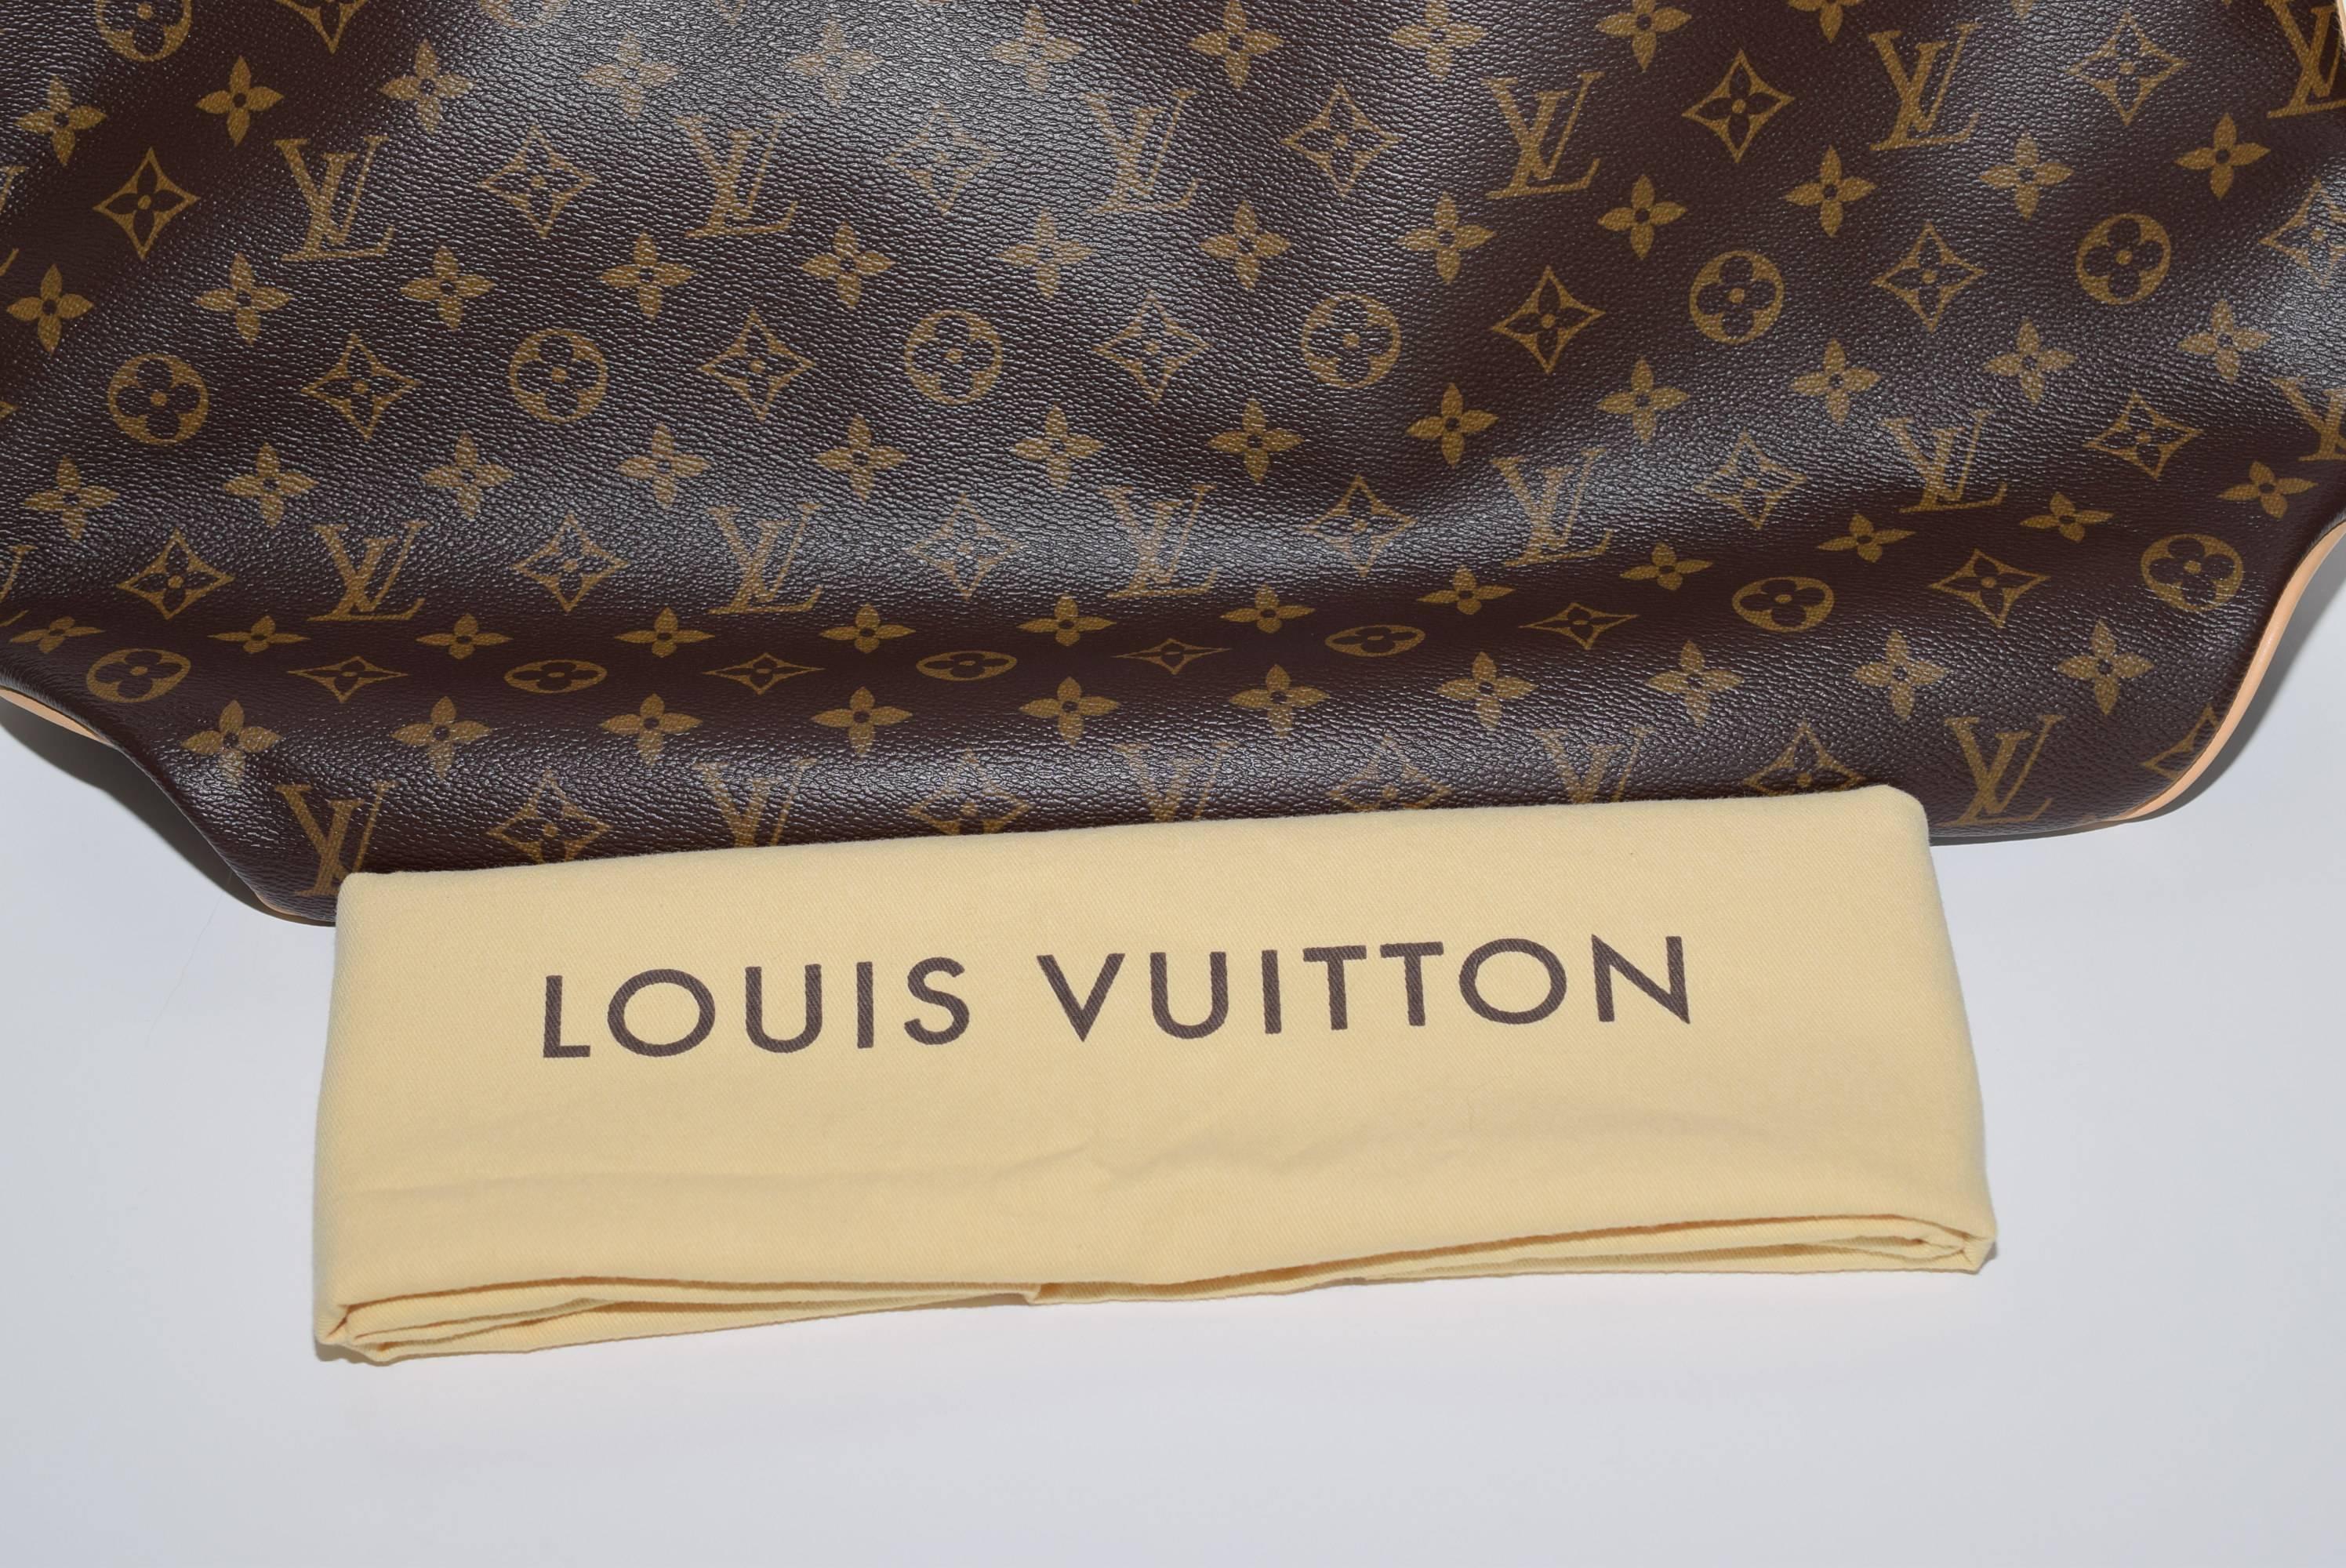 NEW - worn once- Louis Vuitton Delightful GM Style no M41577 in Monogram with beige interior- Date Code MI4100 Made in France!!
Comes with Louis Vuitton dust bag and tag 
 We guarantee everything we sell is 100% authentic. All of our bags are as